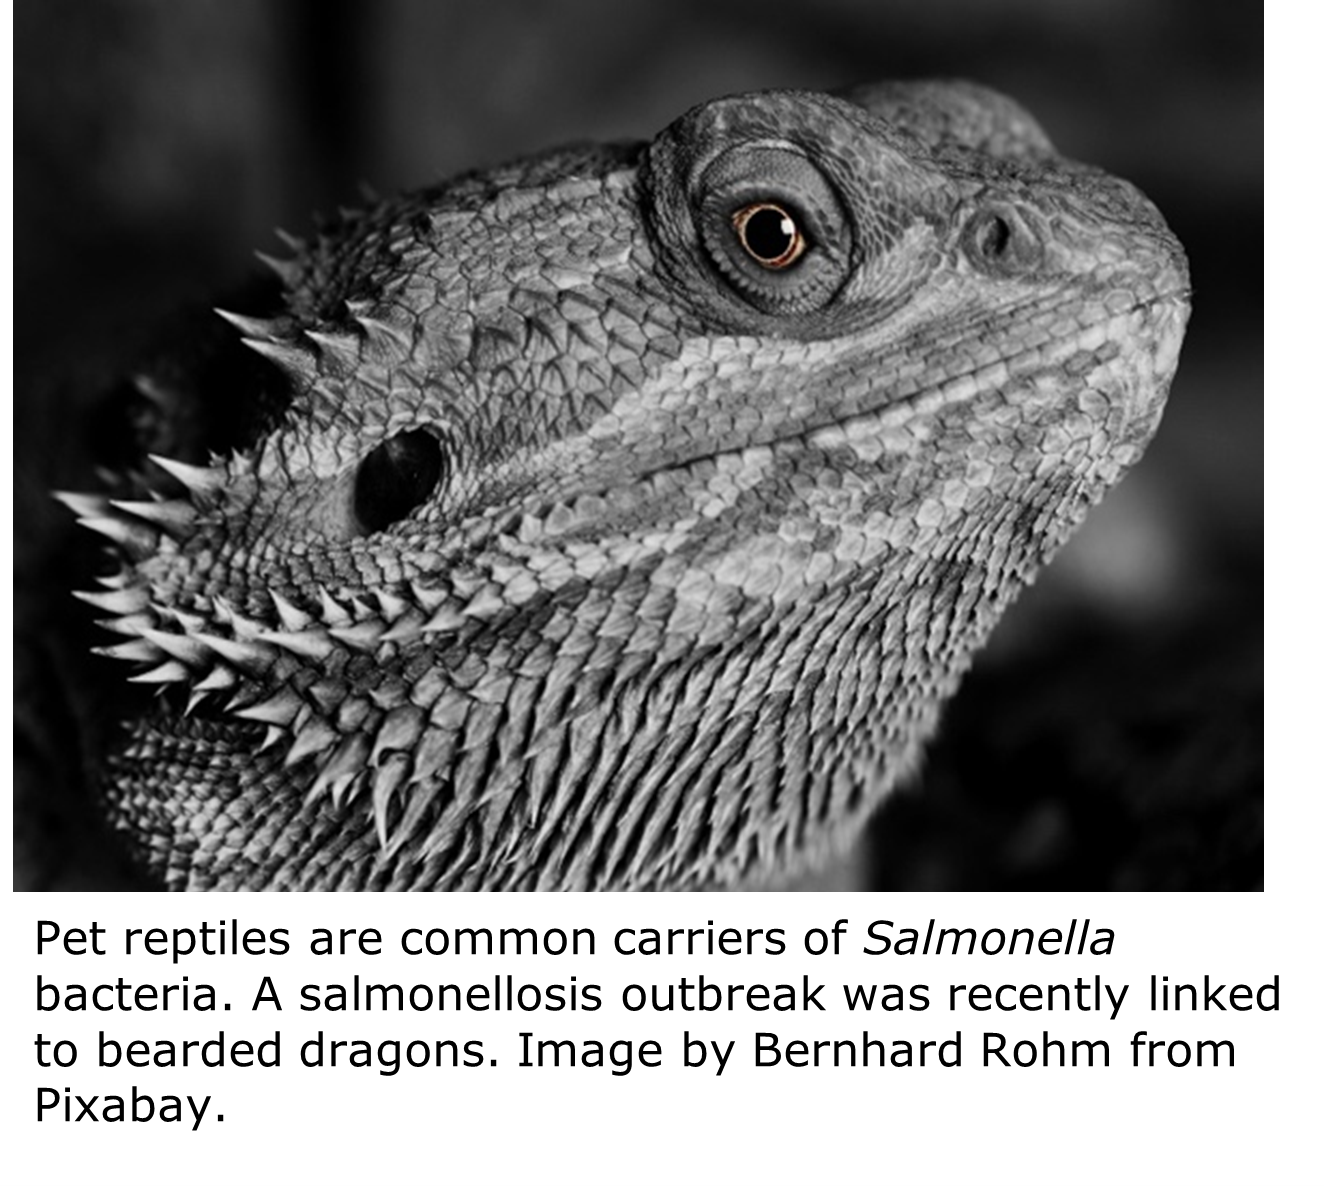 "A close up of a bearded dragon's face"